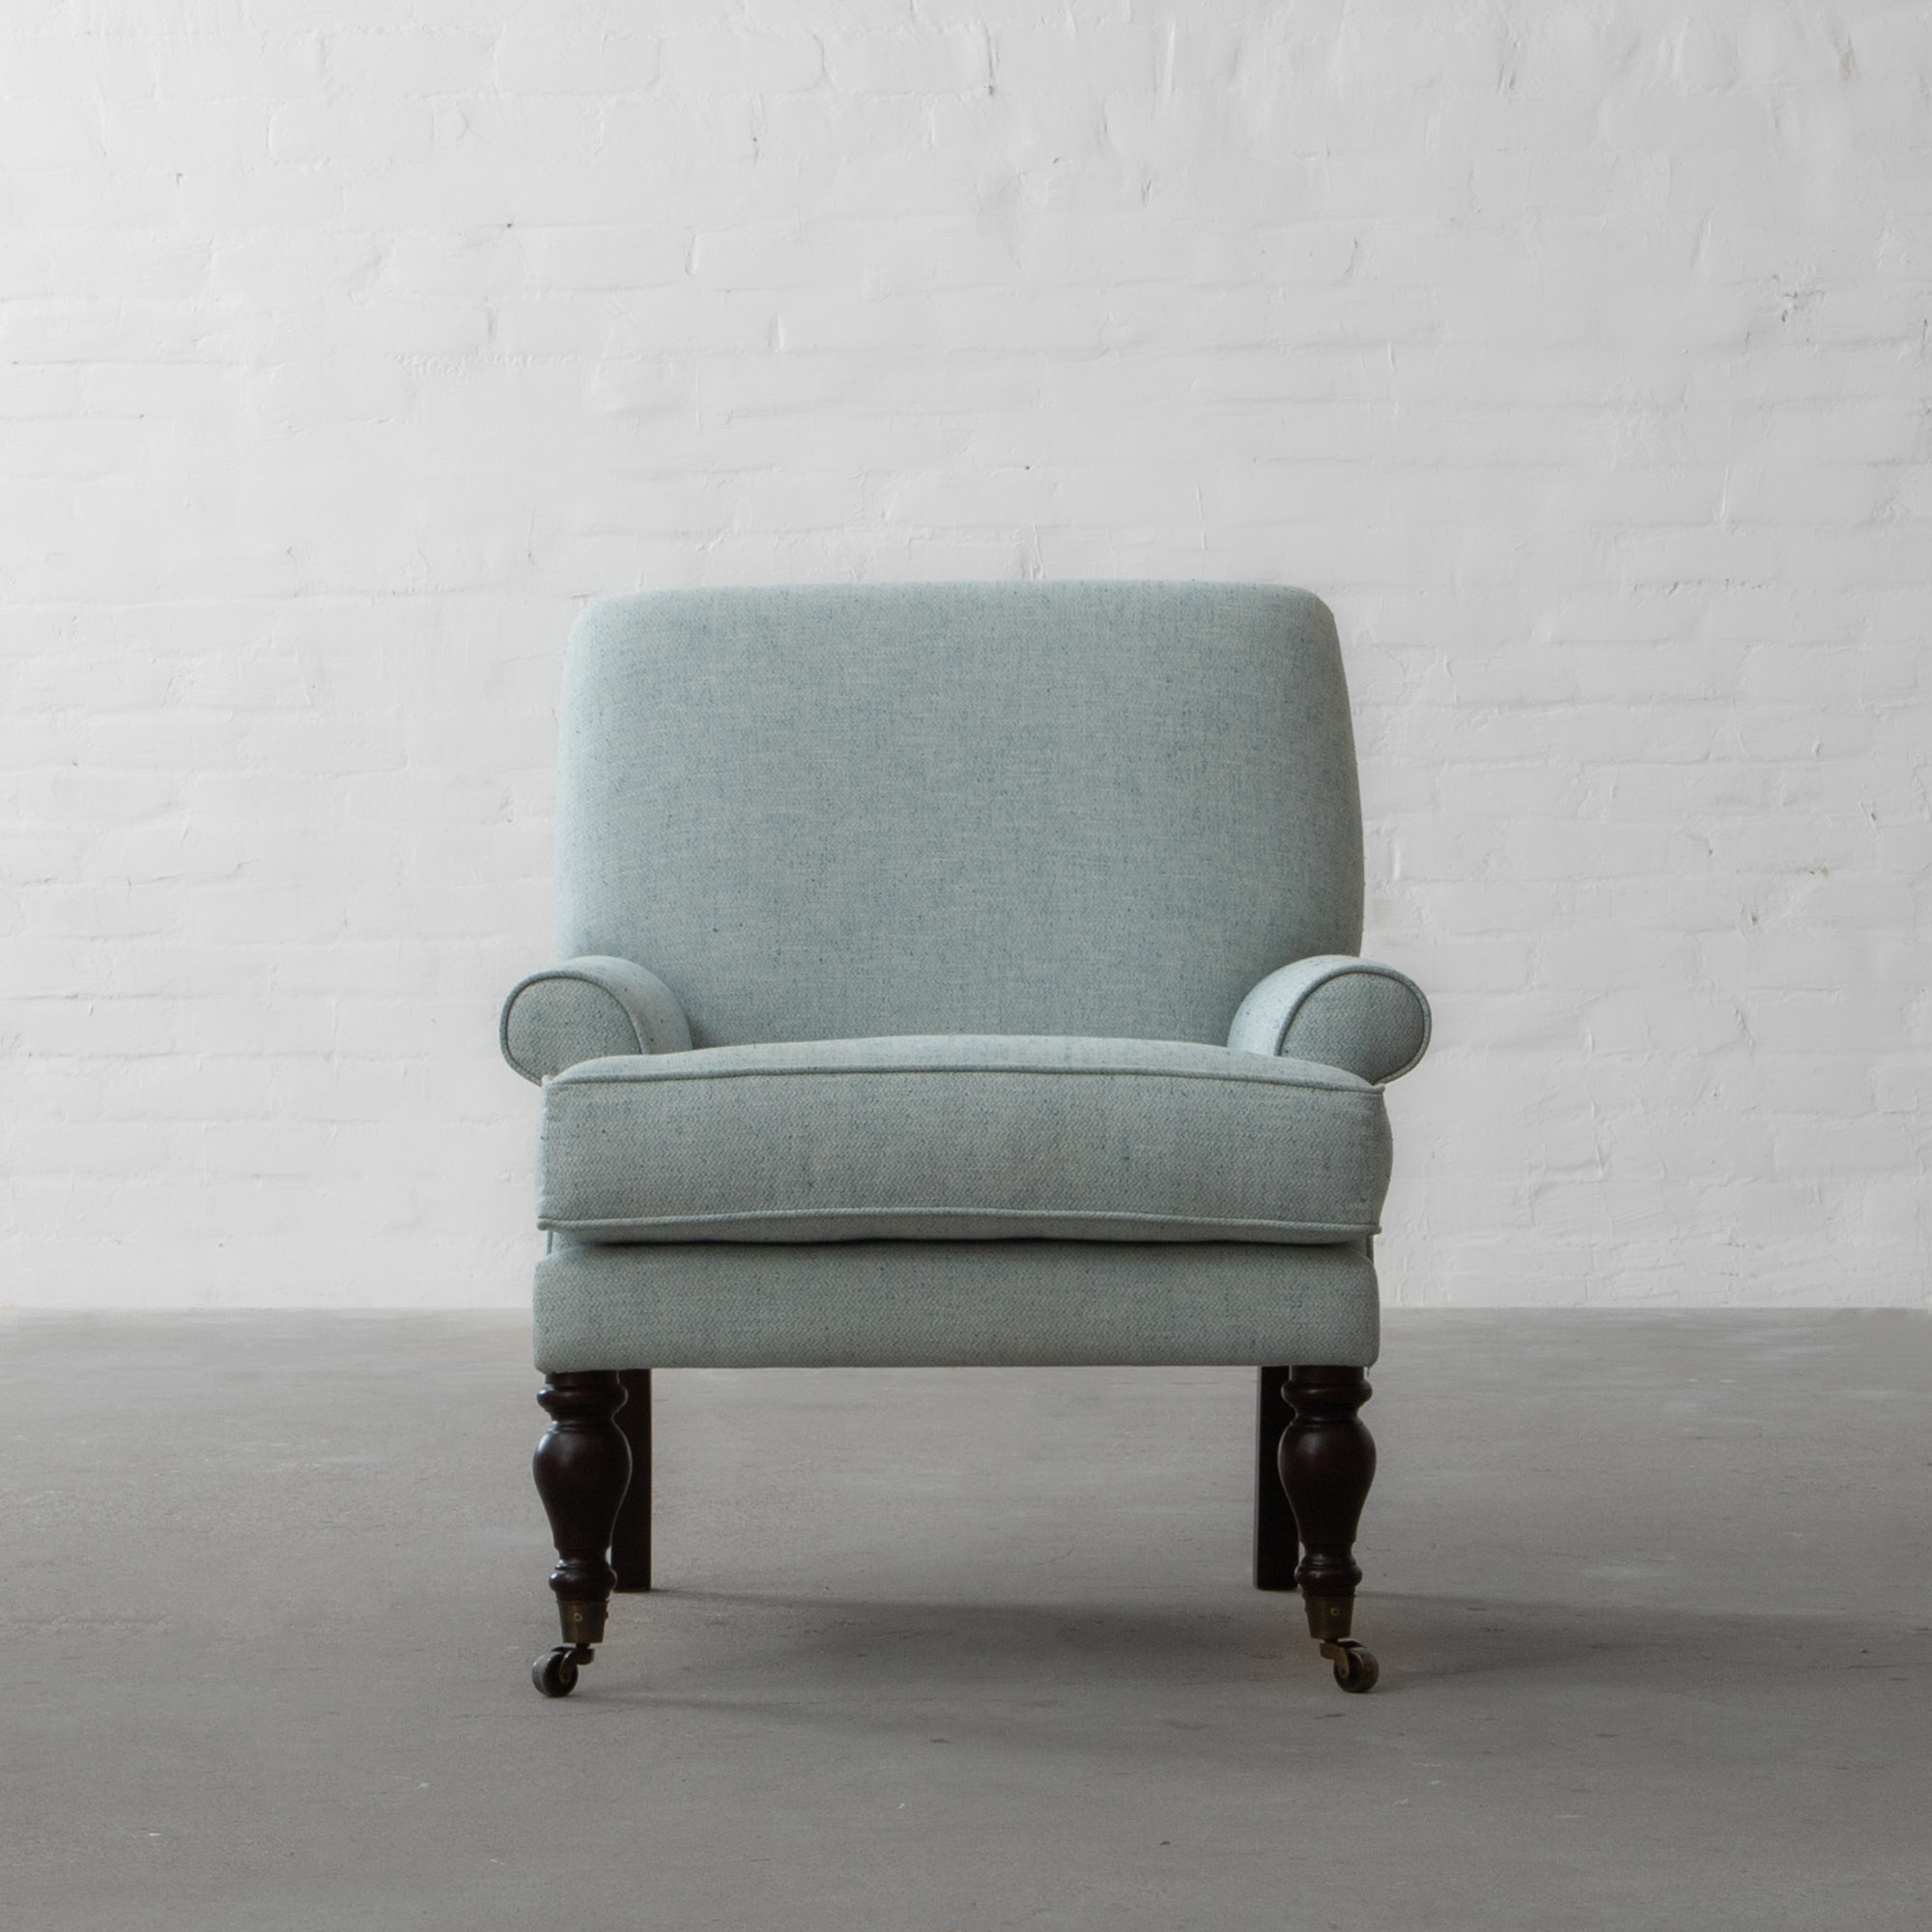 Coorg Armchair Collection